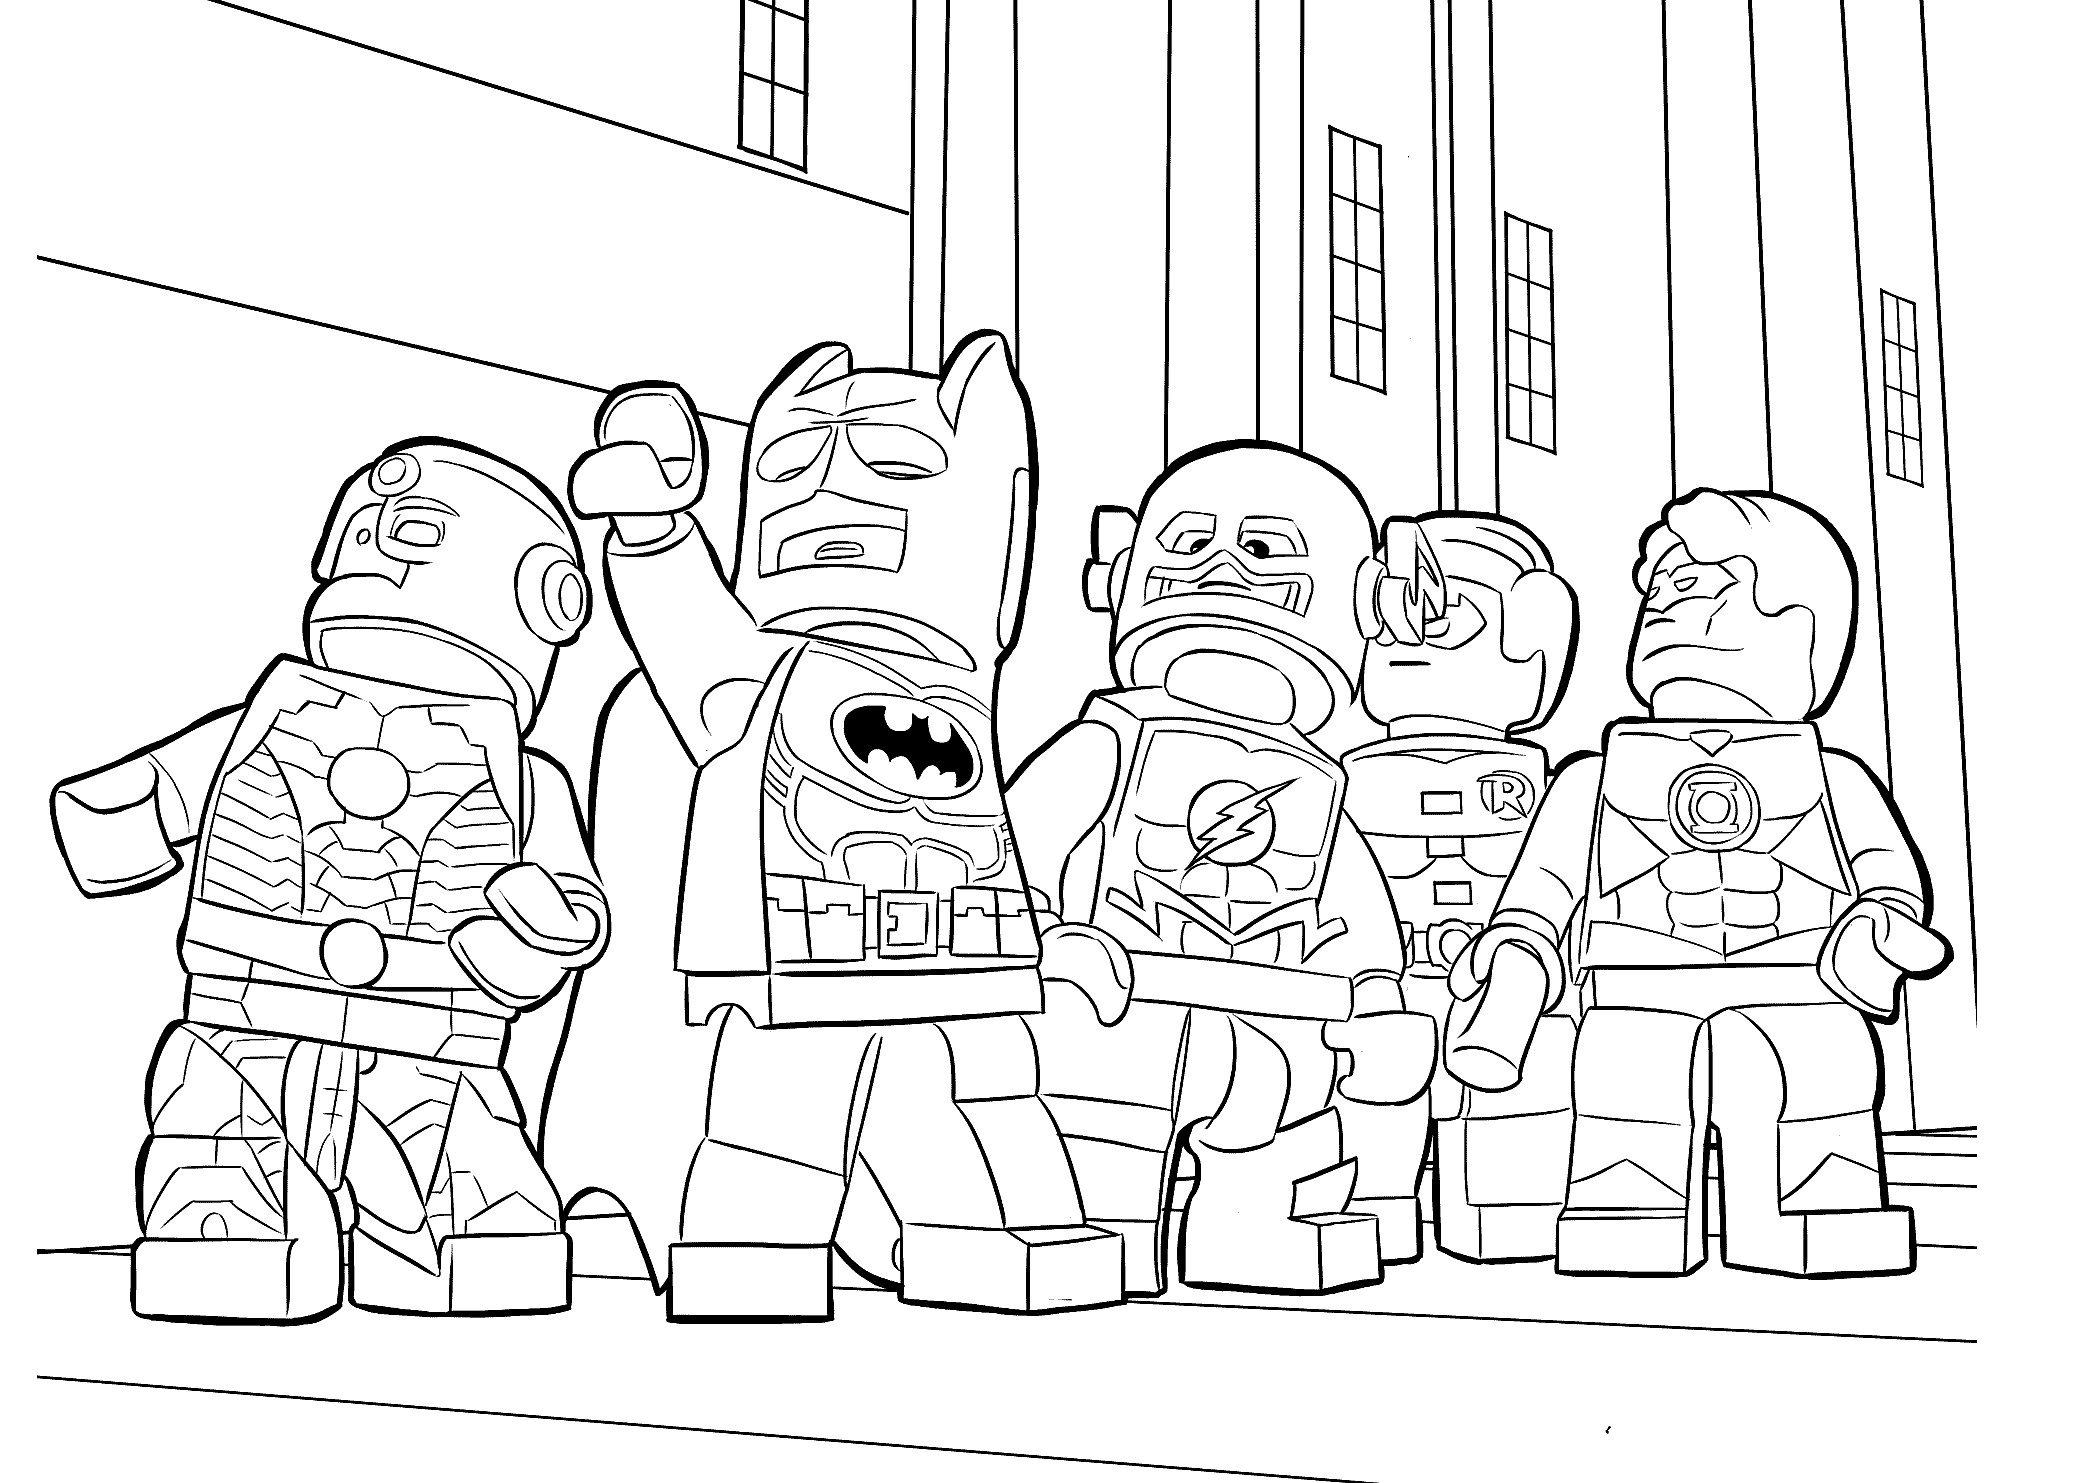 Coloring Sheets For Boys Printable
 Lego heroes coloring page for boys printable free Lego